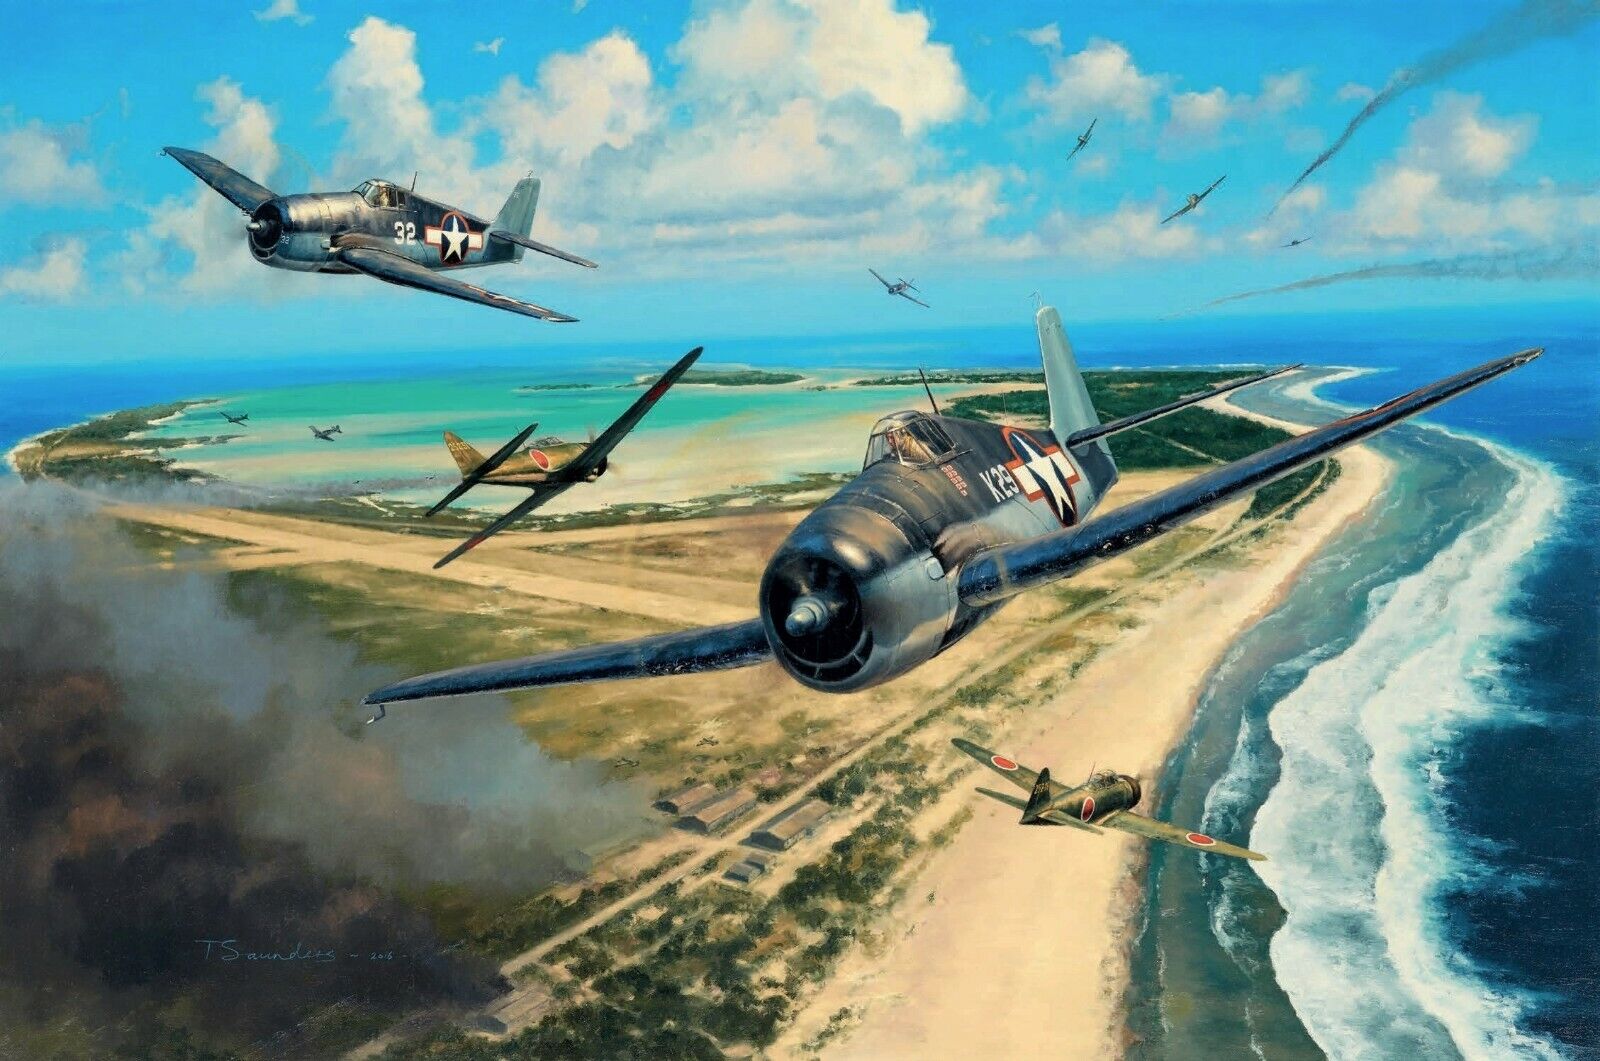 Pacific Glory by Anthony Saunders, Butch O' Hare at Wake Island